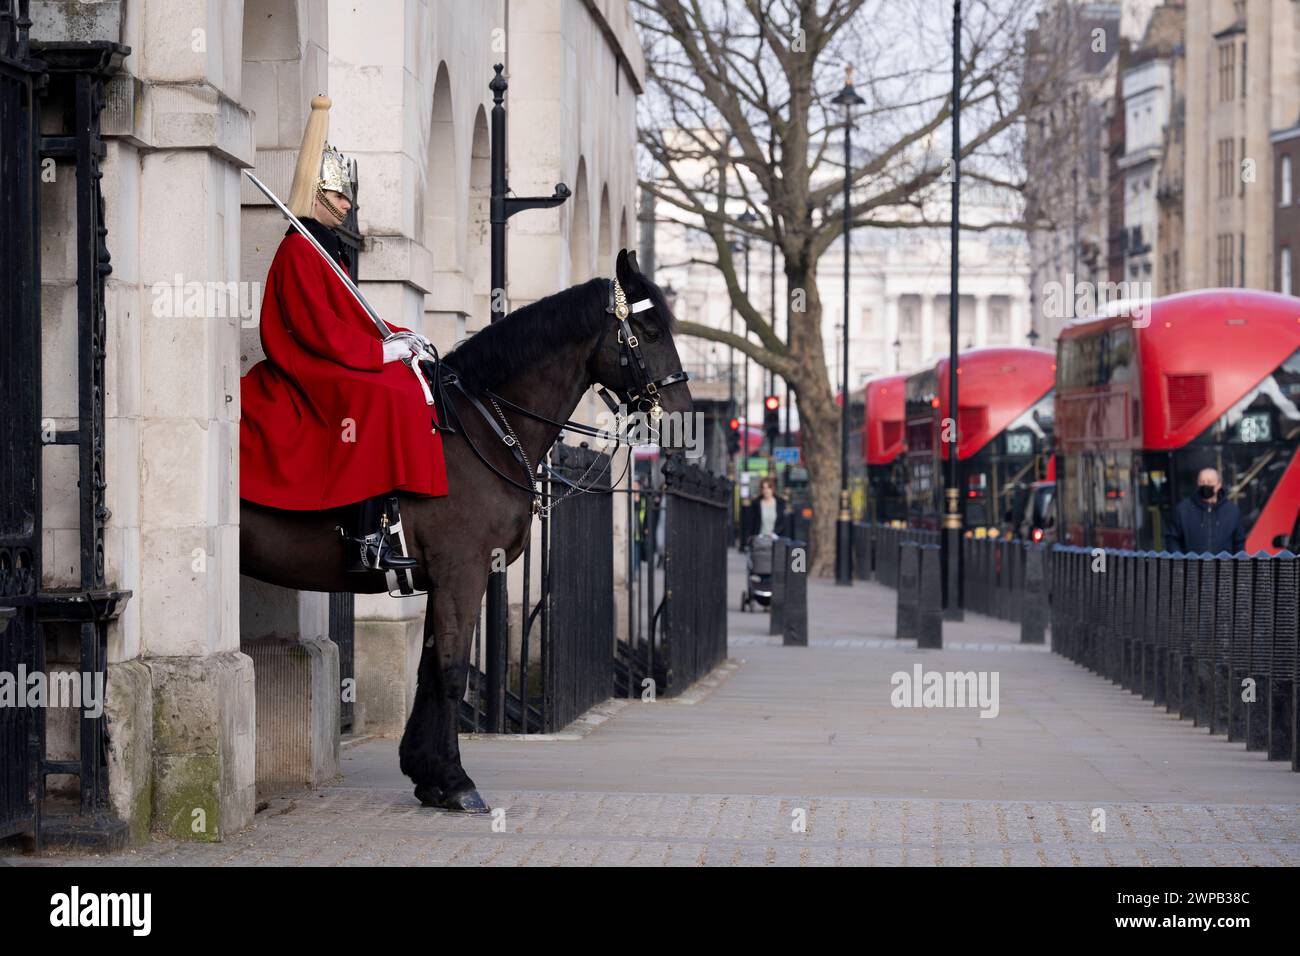 Ceremonial parade of a mounted Horse Guard sentry on Whitehall, on 6th March 2024, in London, England. Two mounted sentries guard the entrance to Horse Guards on Whitehall from 10:00am until 4:00pm. The King’s Life Guard is conducted by soldiers of the Household Cavalry Mounted Regiment at Horse Guards. Horse Guards is named after the troops who have mounted The King’s Life Guard here since the Restoration of King Charles II in 1660. Stock Photo